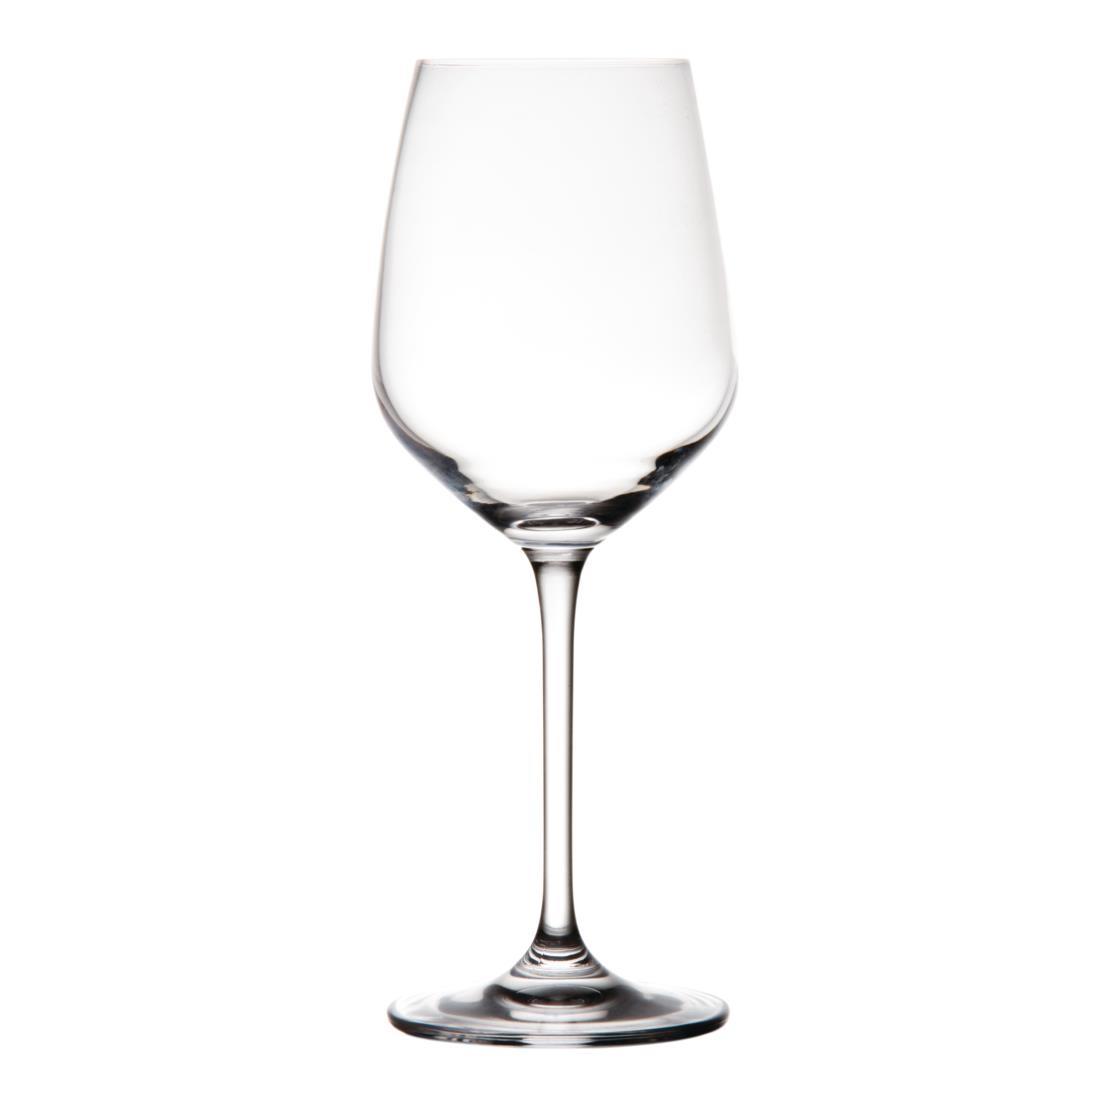 Olympia Chime Crystal Wine Glasses 620ml (Pack of 6) - GF735  - 1